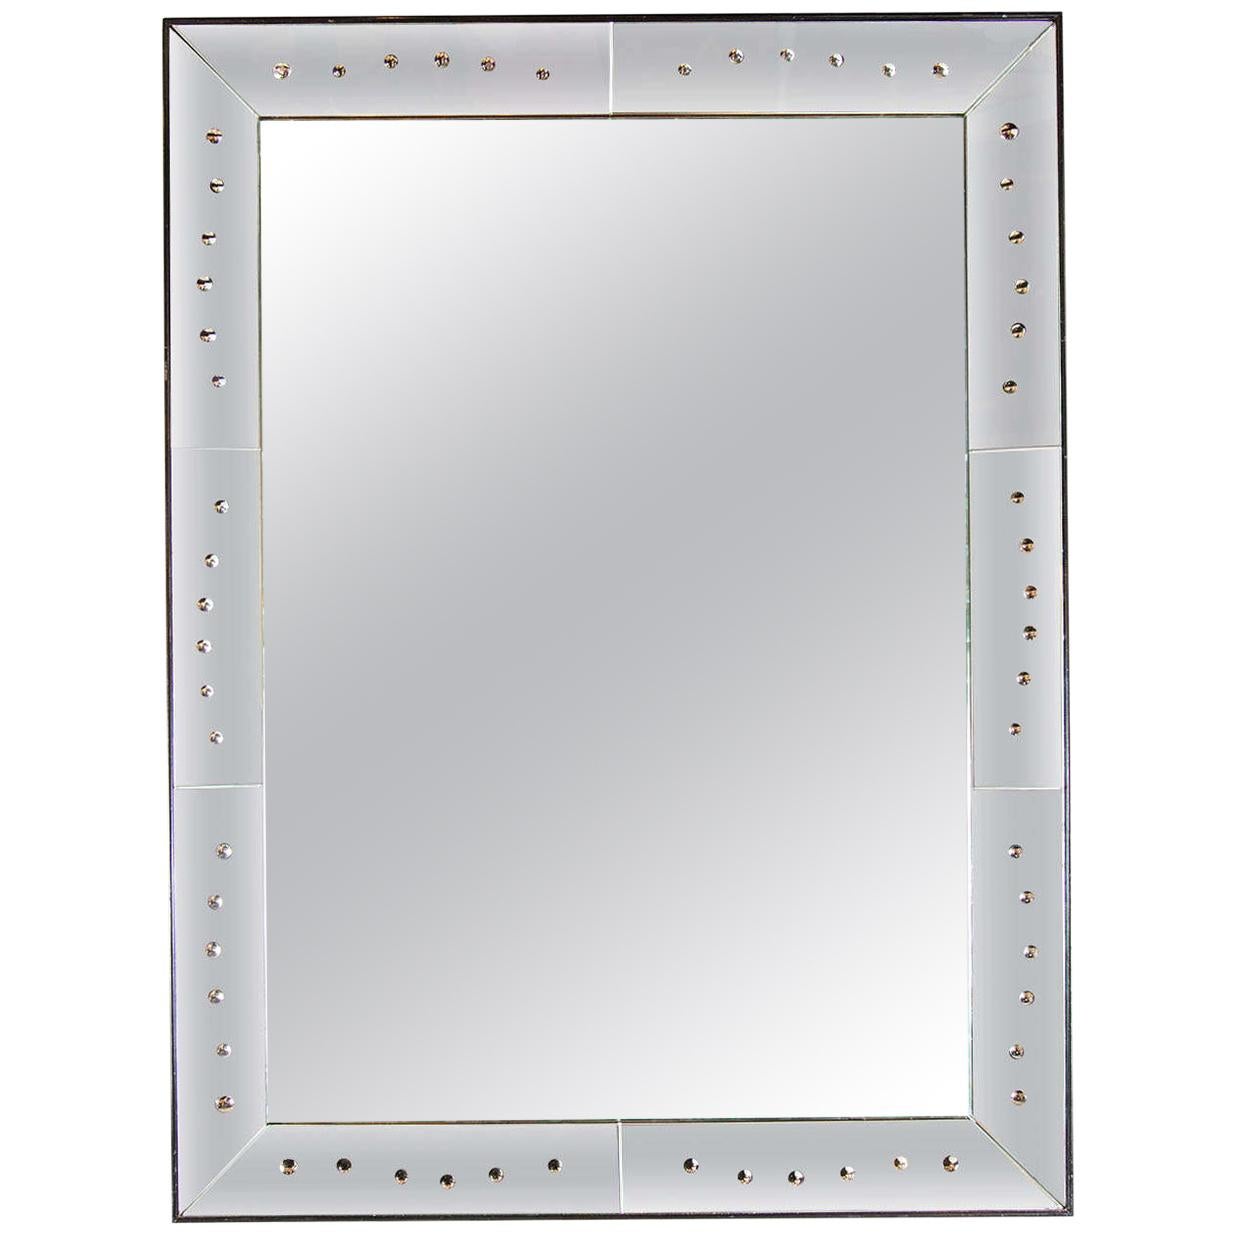 1940s Art Deco Rectangular Mirror with Reverse Etched & Beveled Circle Detailing